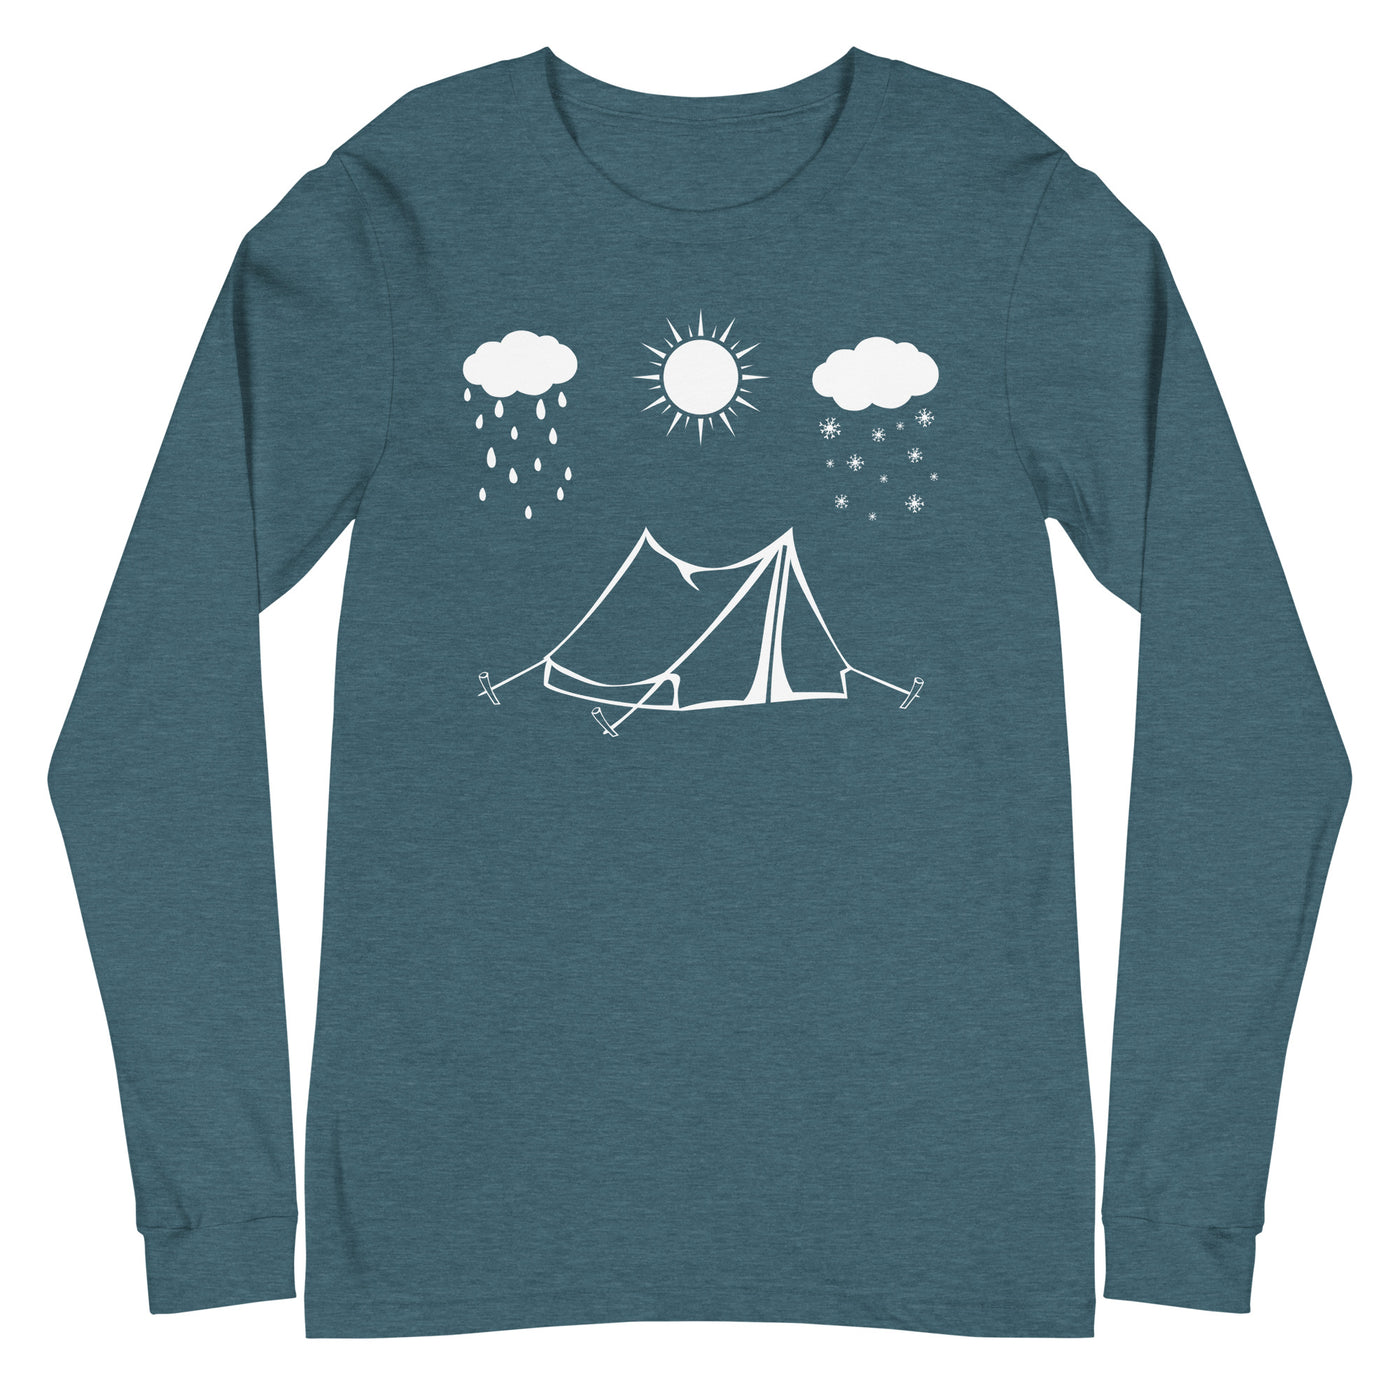 All Seasons And Camping - Longsleeve (Unisex) camping Heather Deep Teal